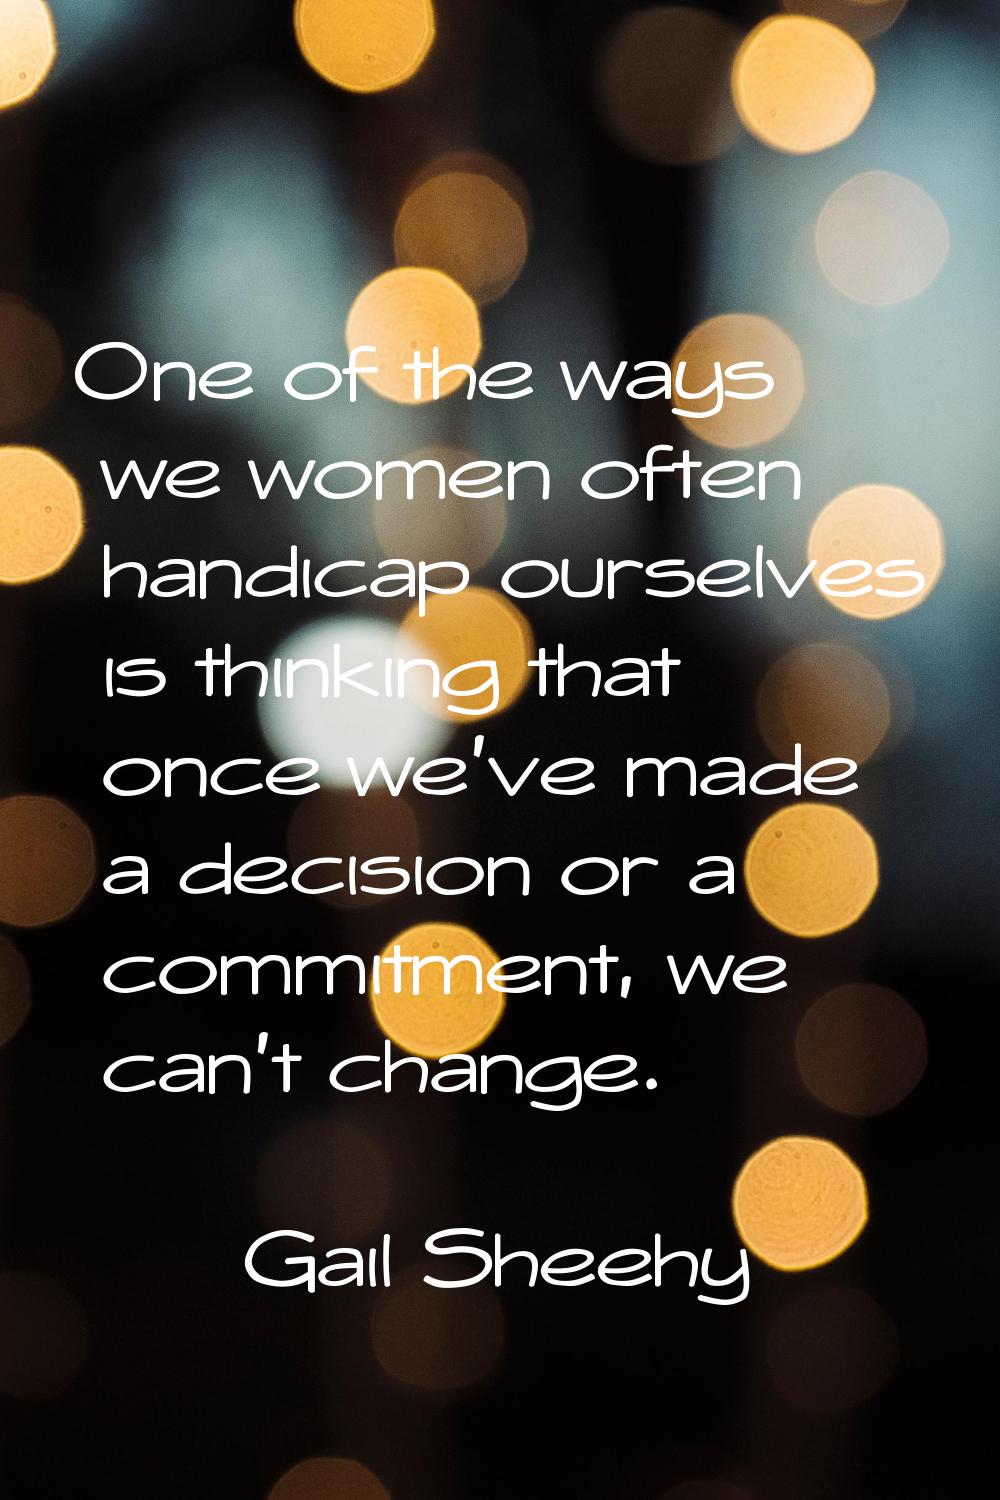 One of the ways we women often handicap ourselves is thinking that once we've made a decision or a 